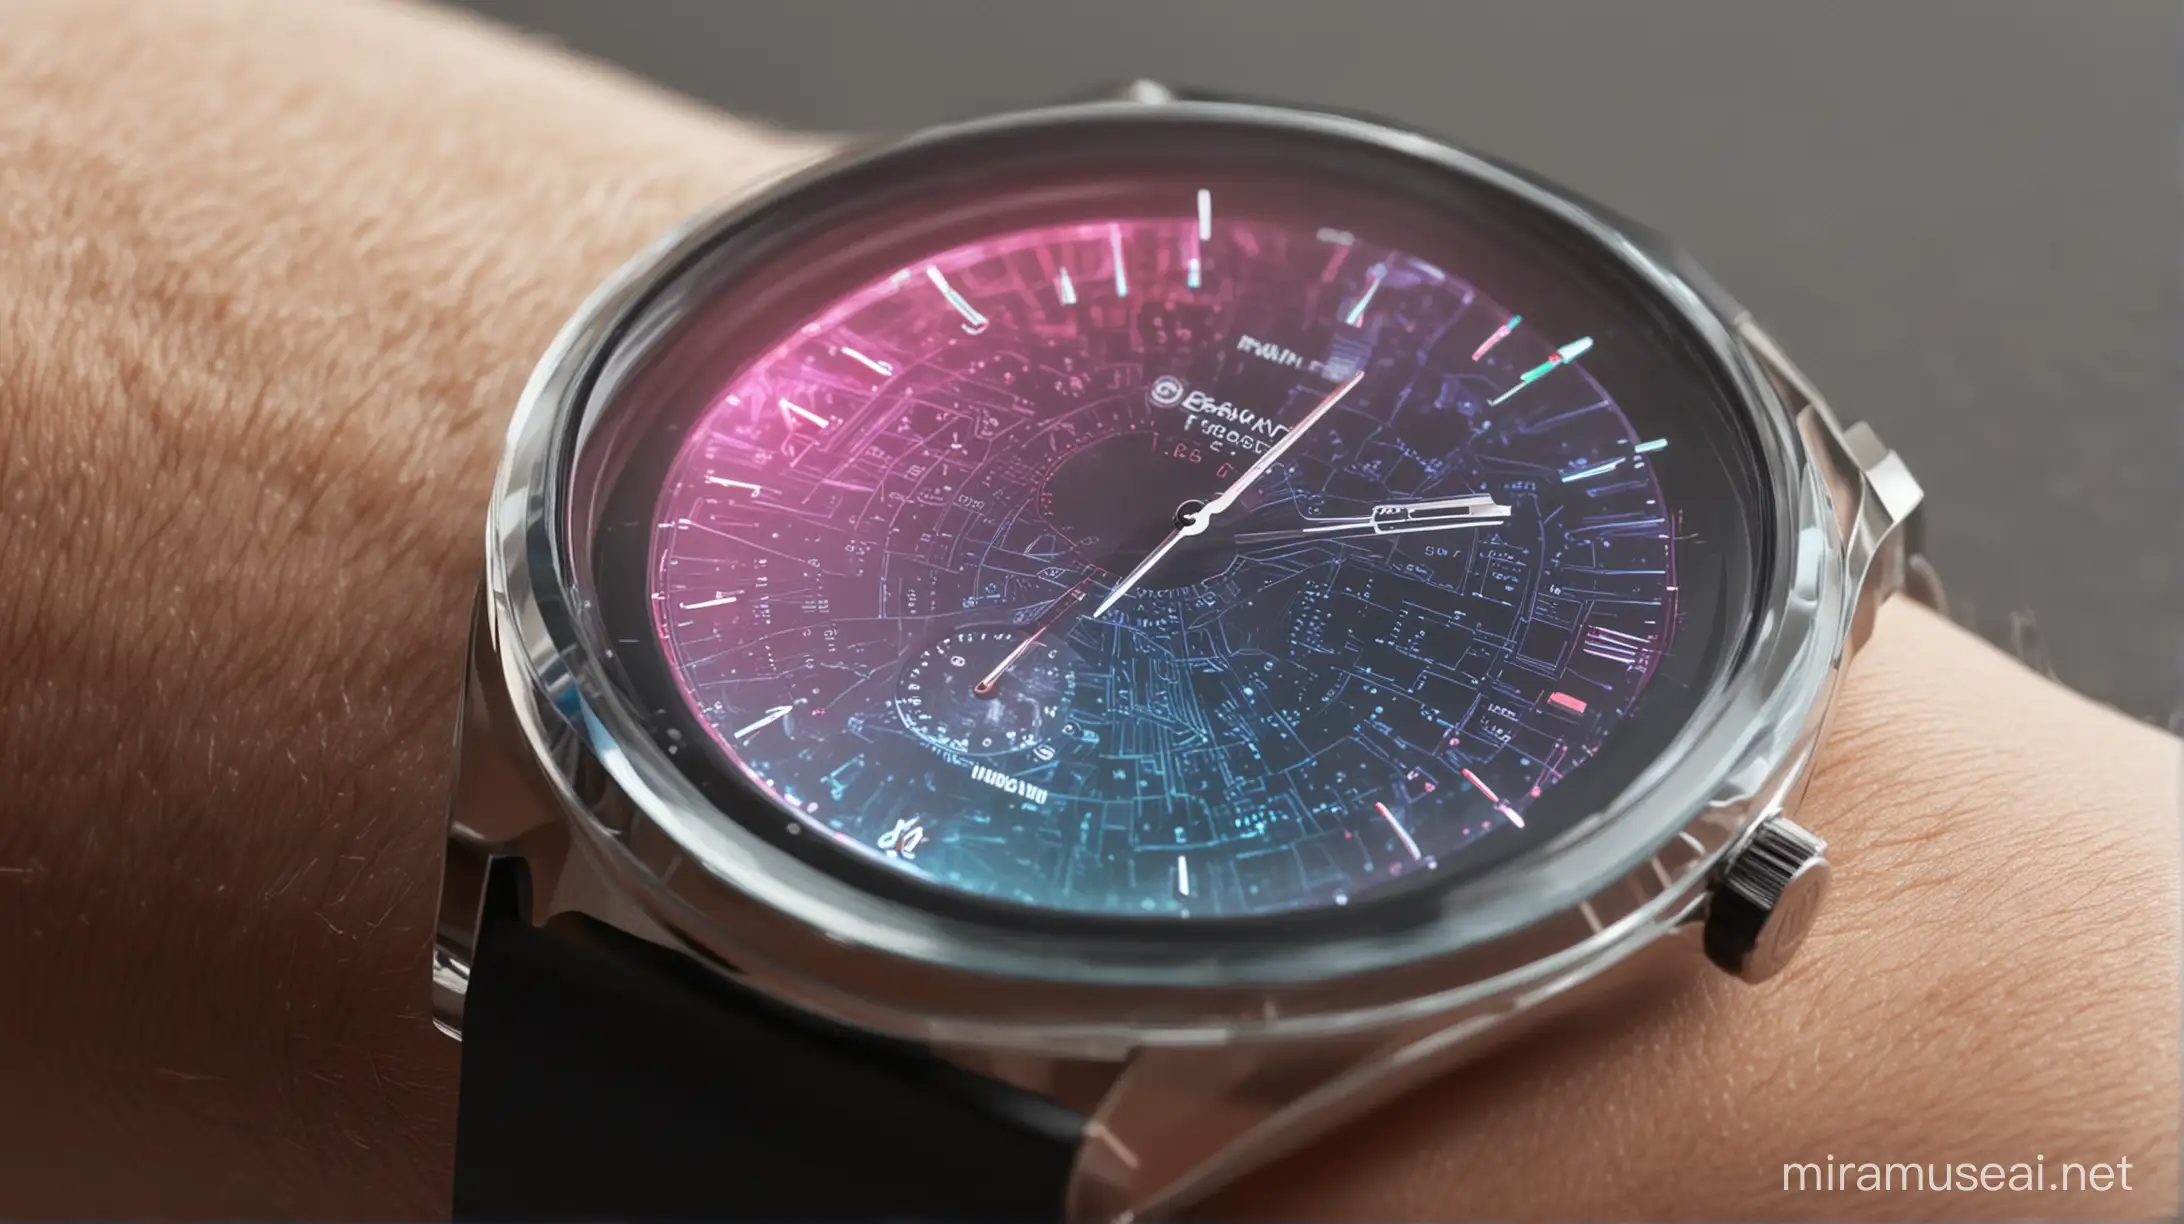 Futuristic Transparent Holographic Watch with CuttingEdge Display